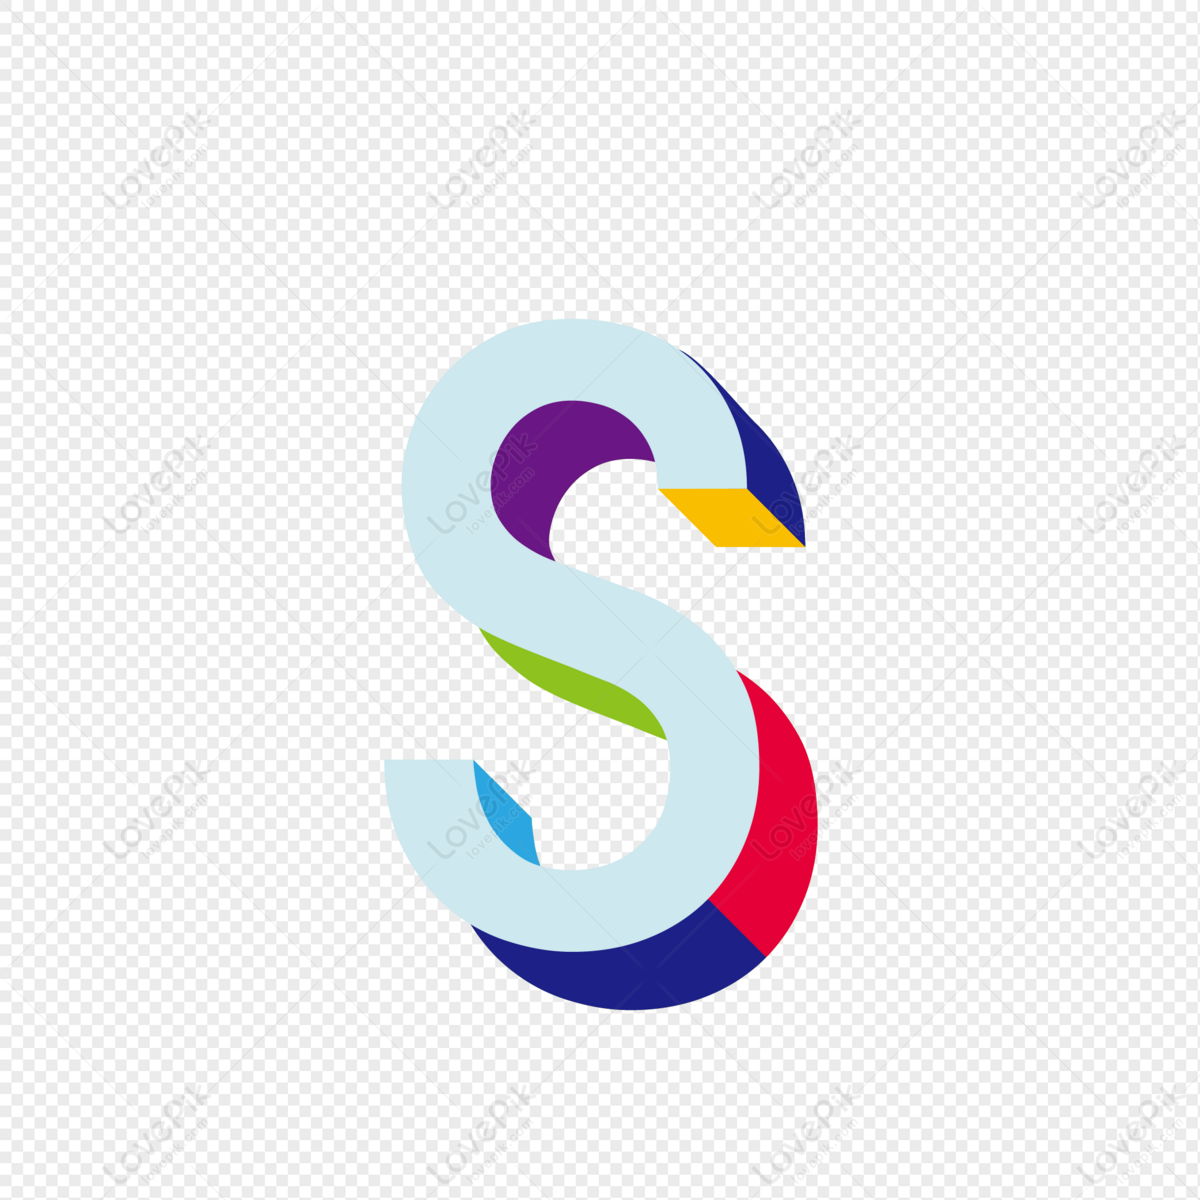 Letter S Name Logo Vector Images (over 6,900)